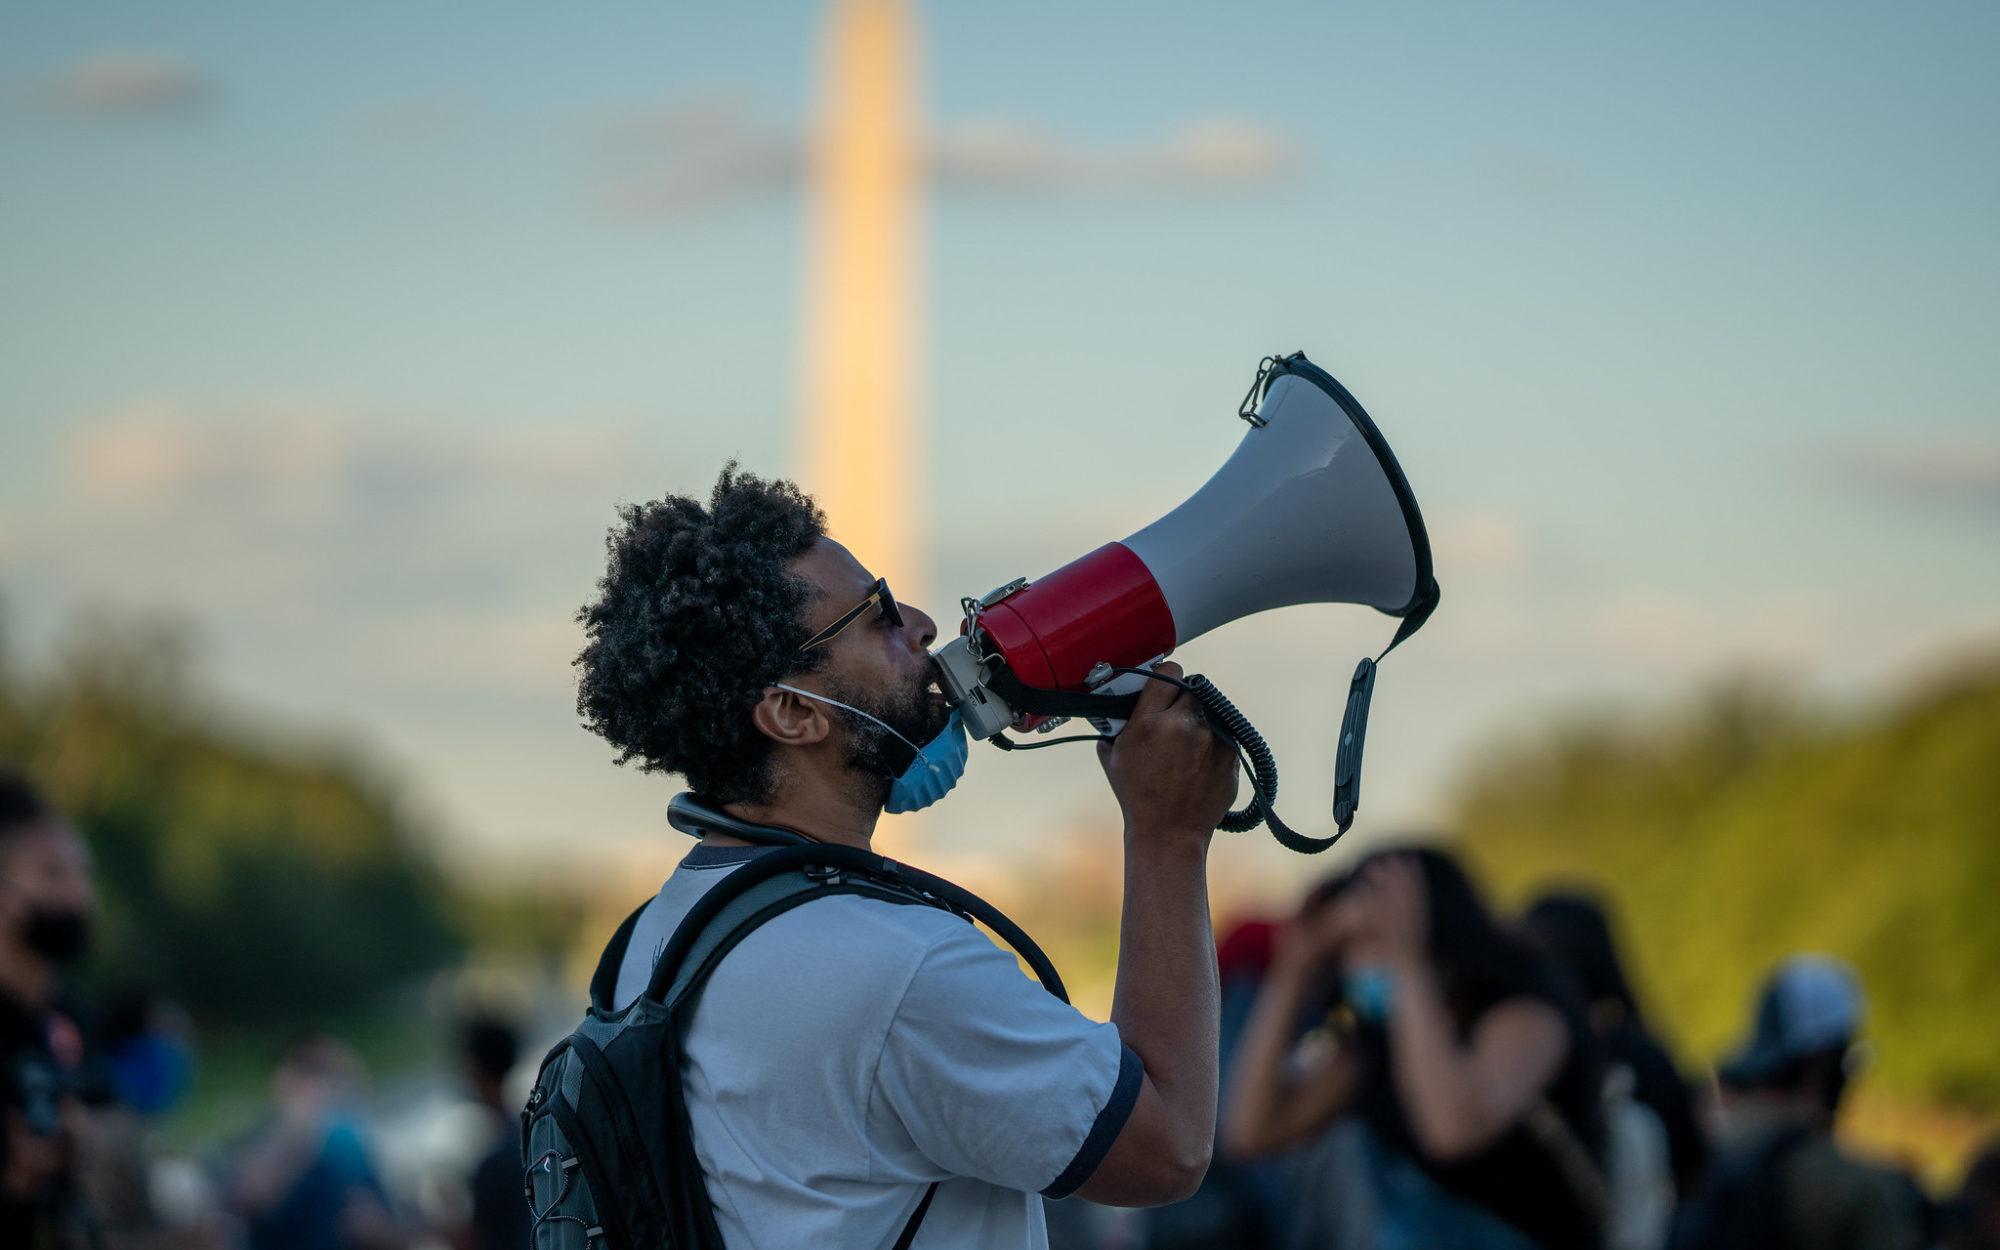 A protester with a loud hailer at the George Floyd Black Lives Matter protest at the Lincoln Memorial